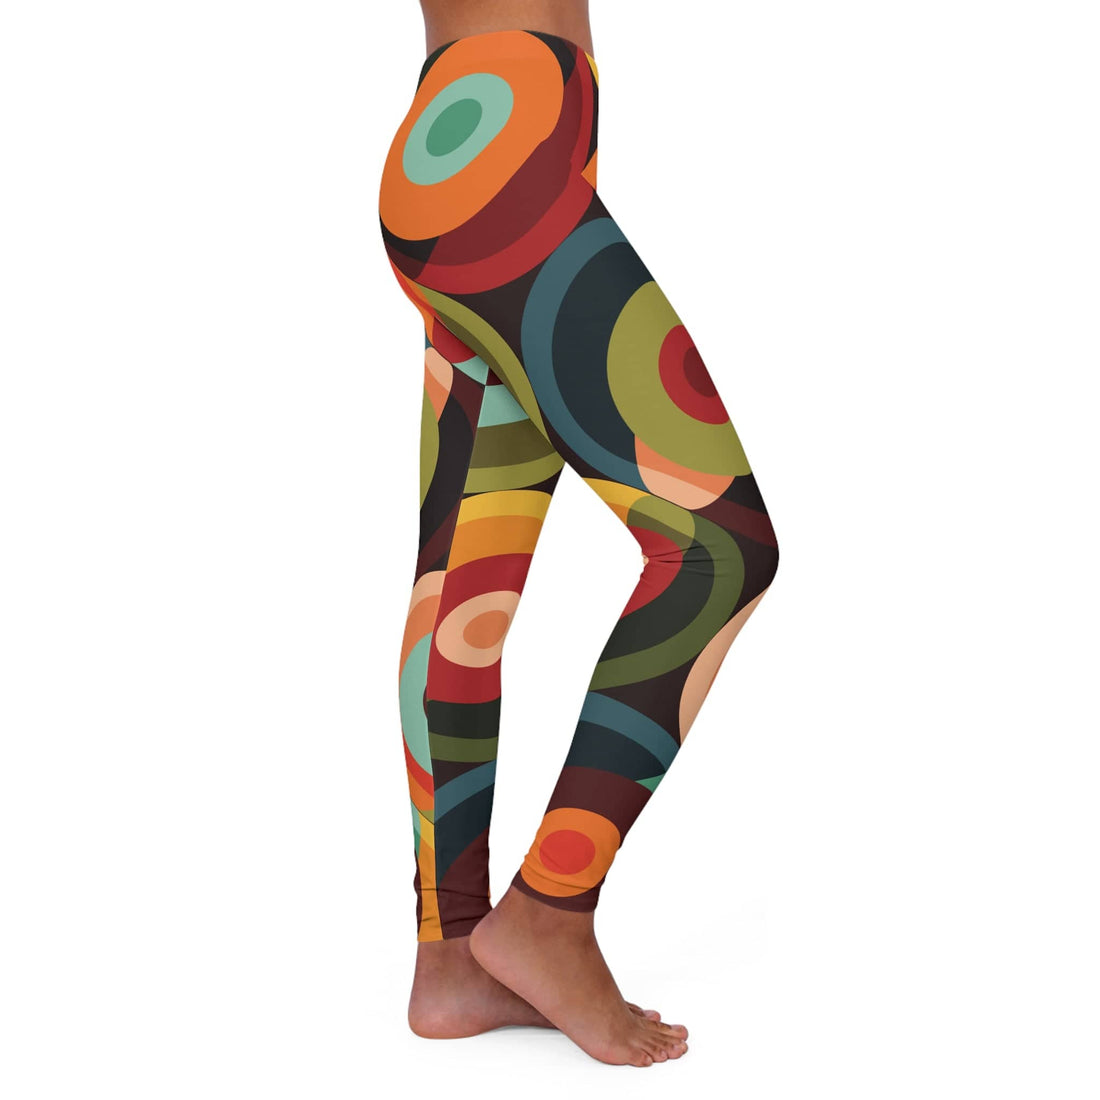 Kate McEnroe New York 70s Groovy Hippie Psychedelic Orbs Leggings, Mid Century Modern Retro Abstract Casual Yoga Pants, Geometric Circles Workout Pants,Leggings49694957427816972987